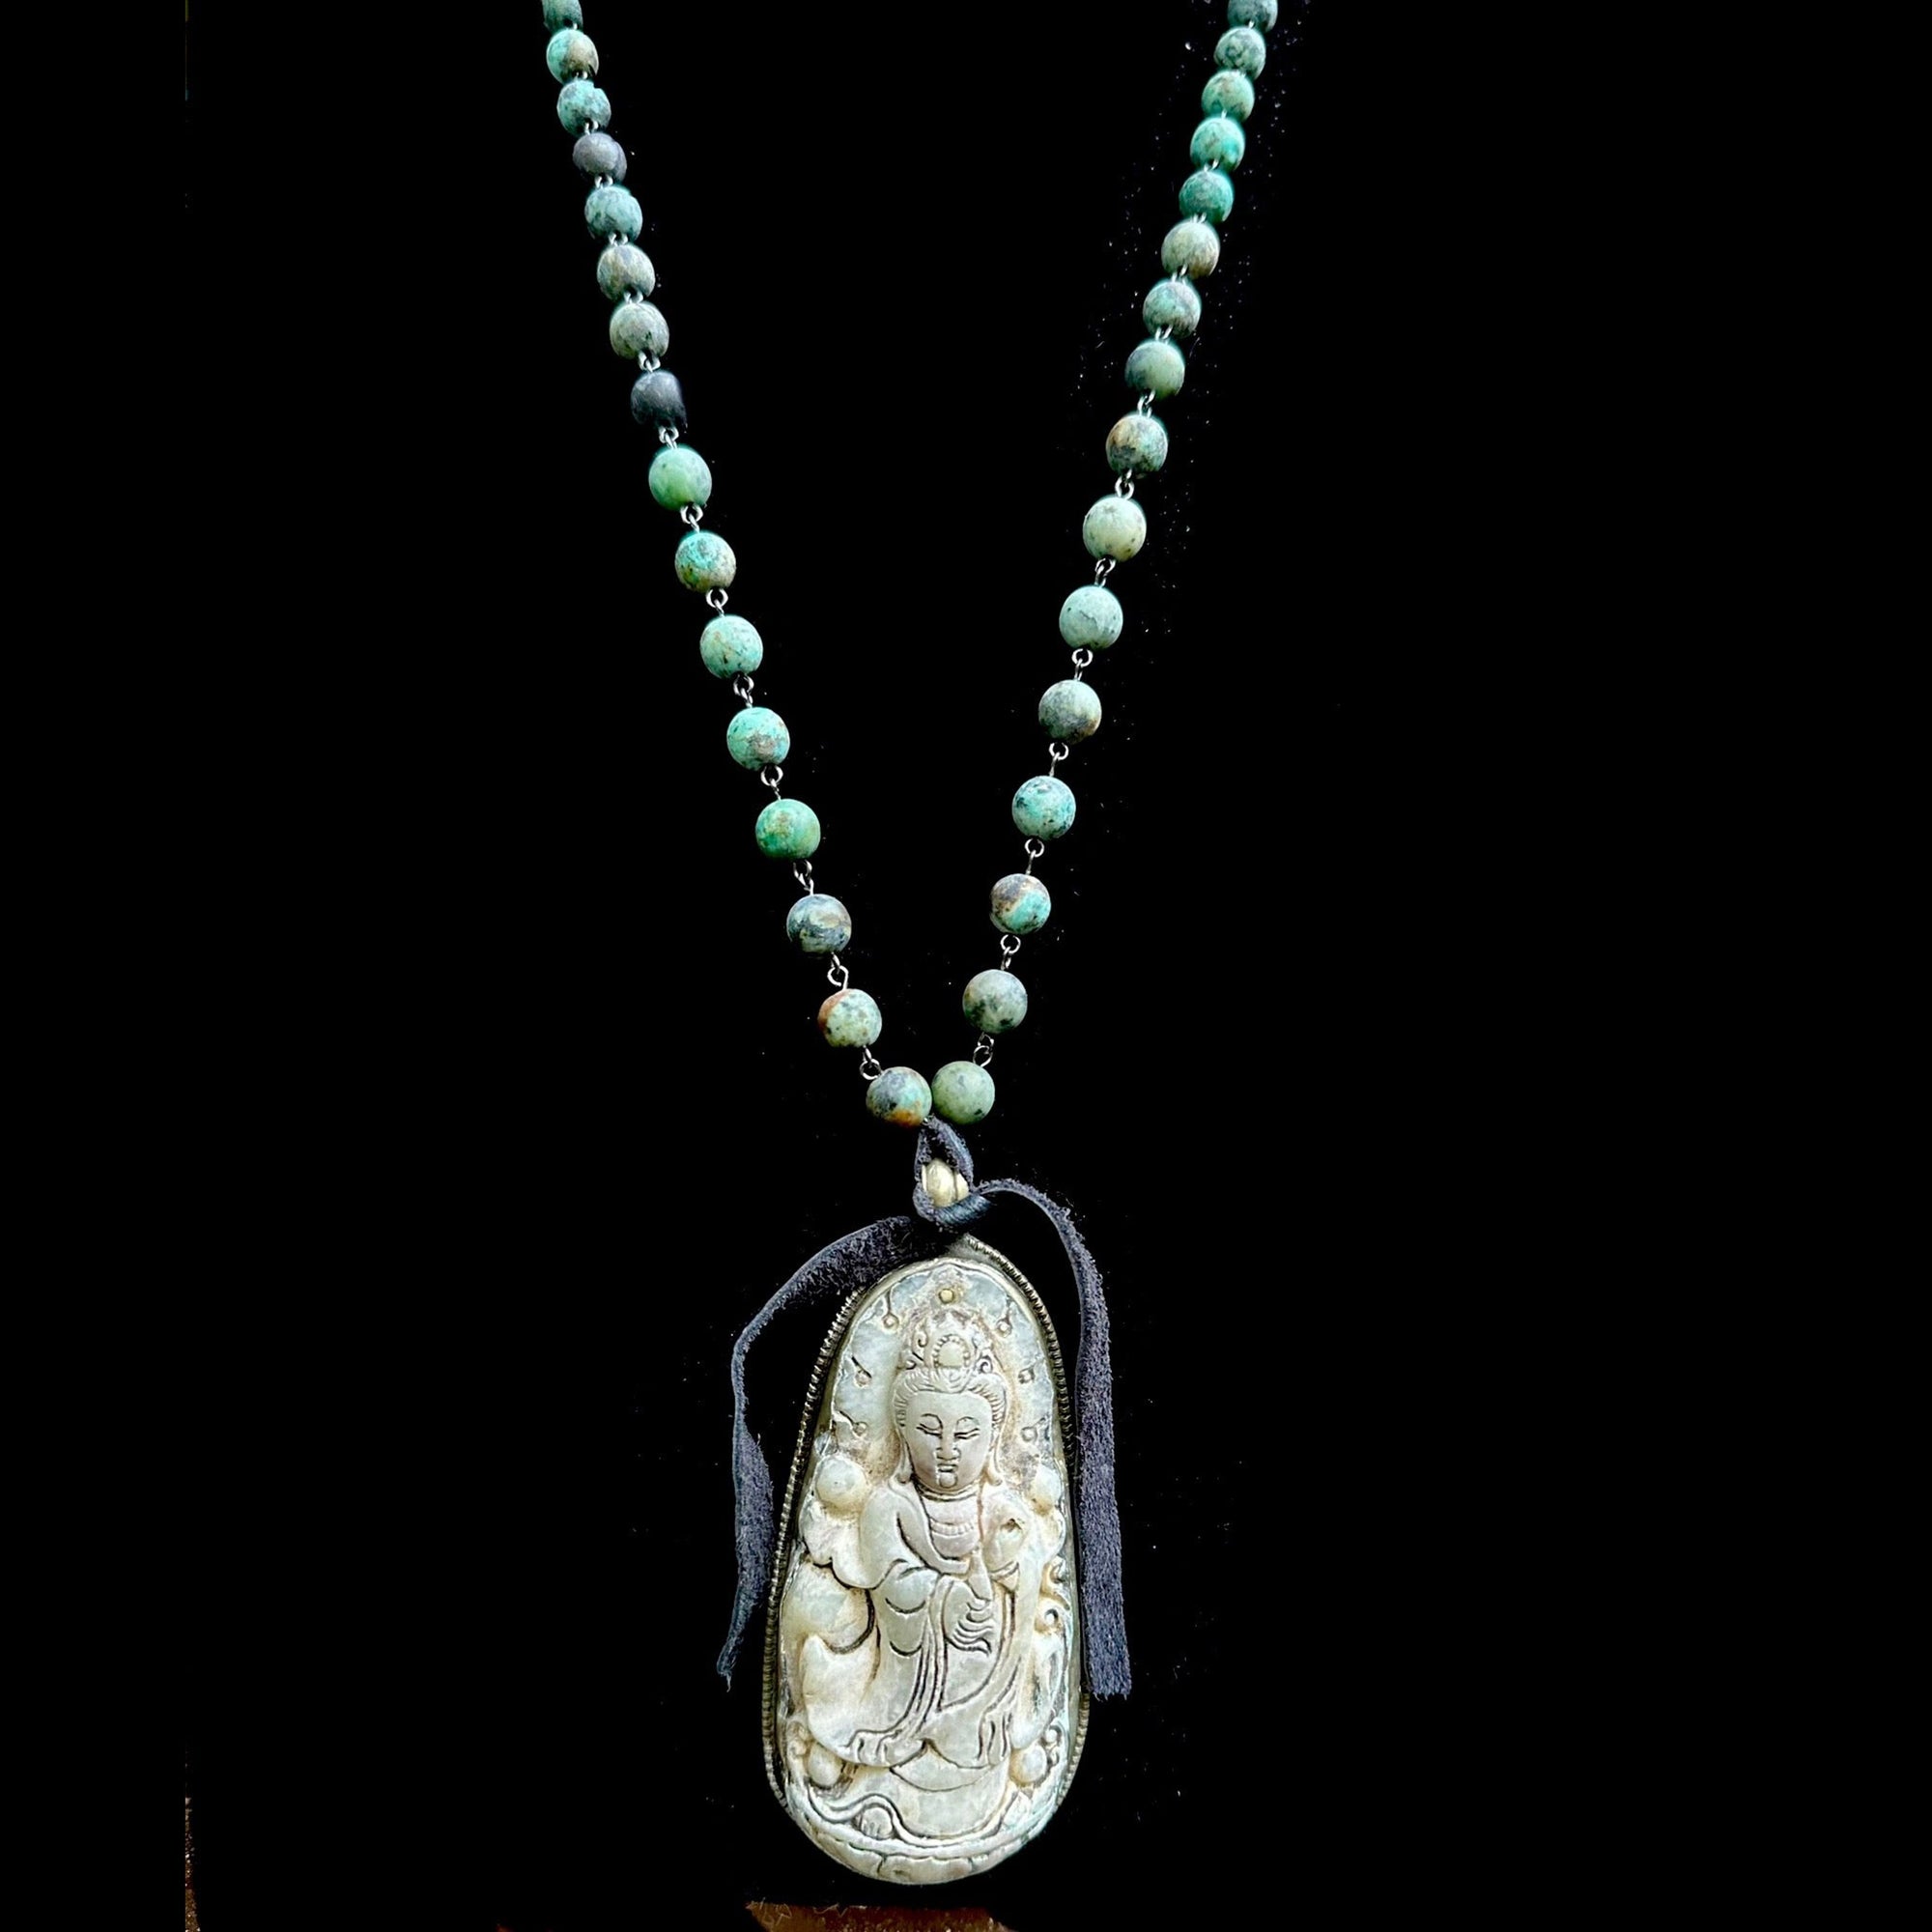 Kwan Yin the Goddess of Mercy and Compassion Necklace